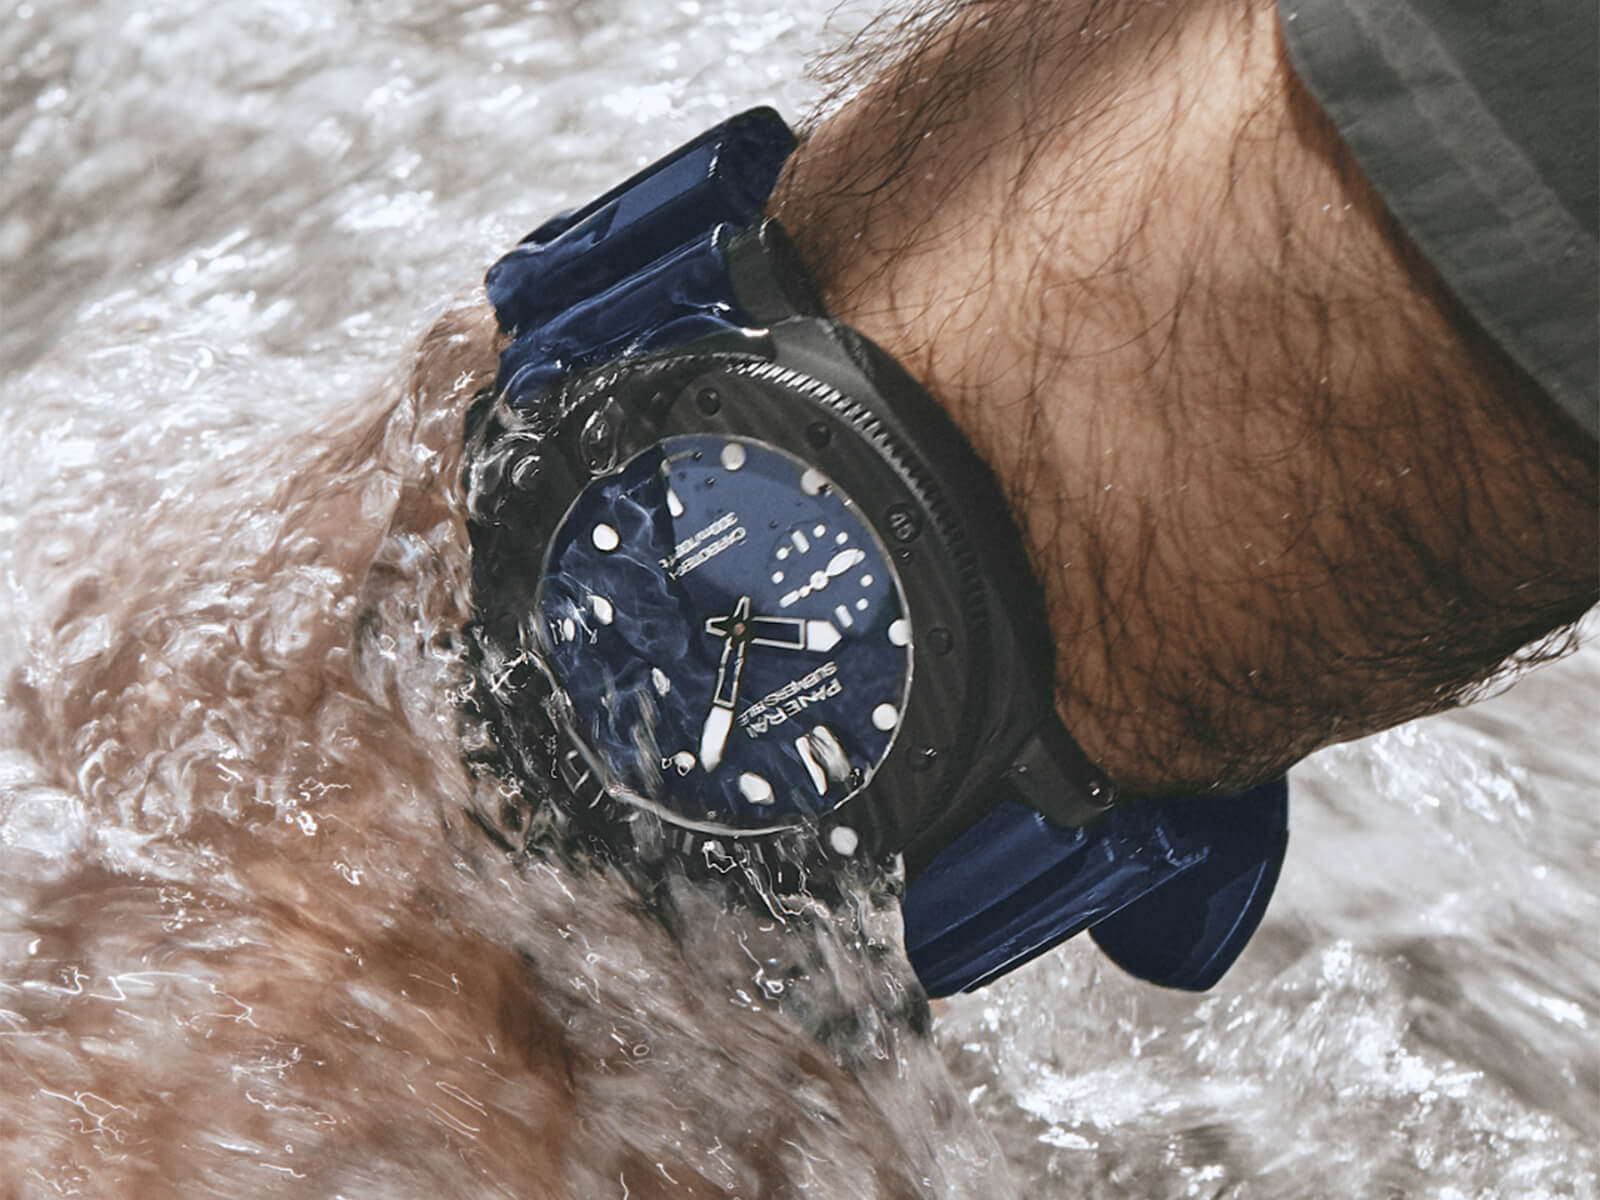 Panerai Submersible Carbotech Blu Abisso PAM01232 - Shop now in Austalia, Sydney, Perth and Online